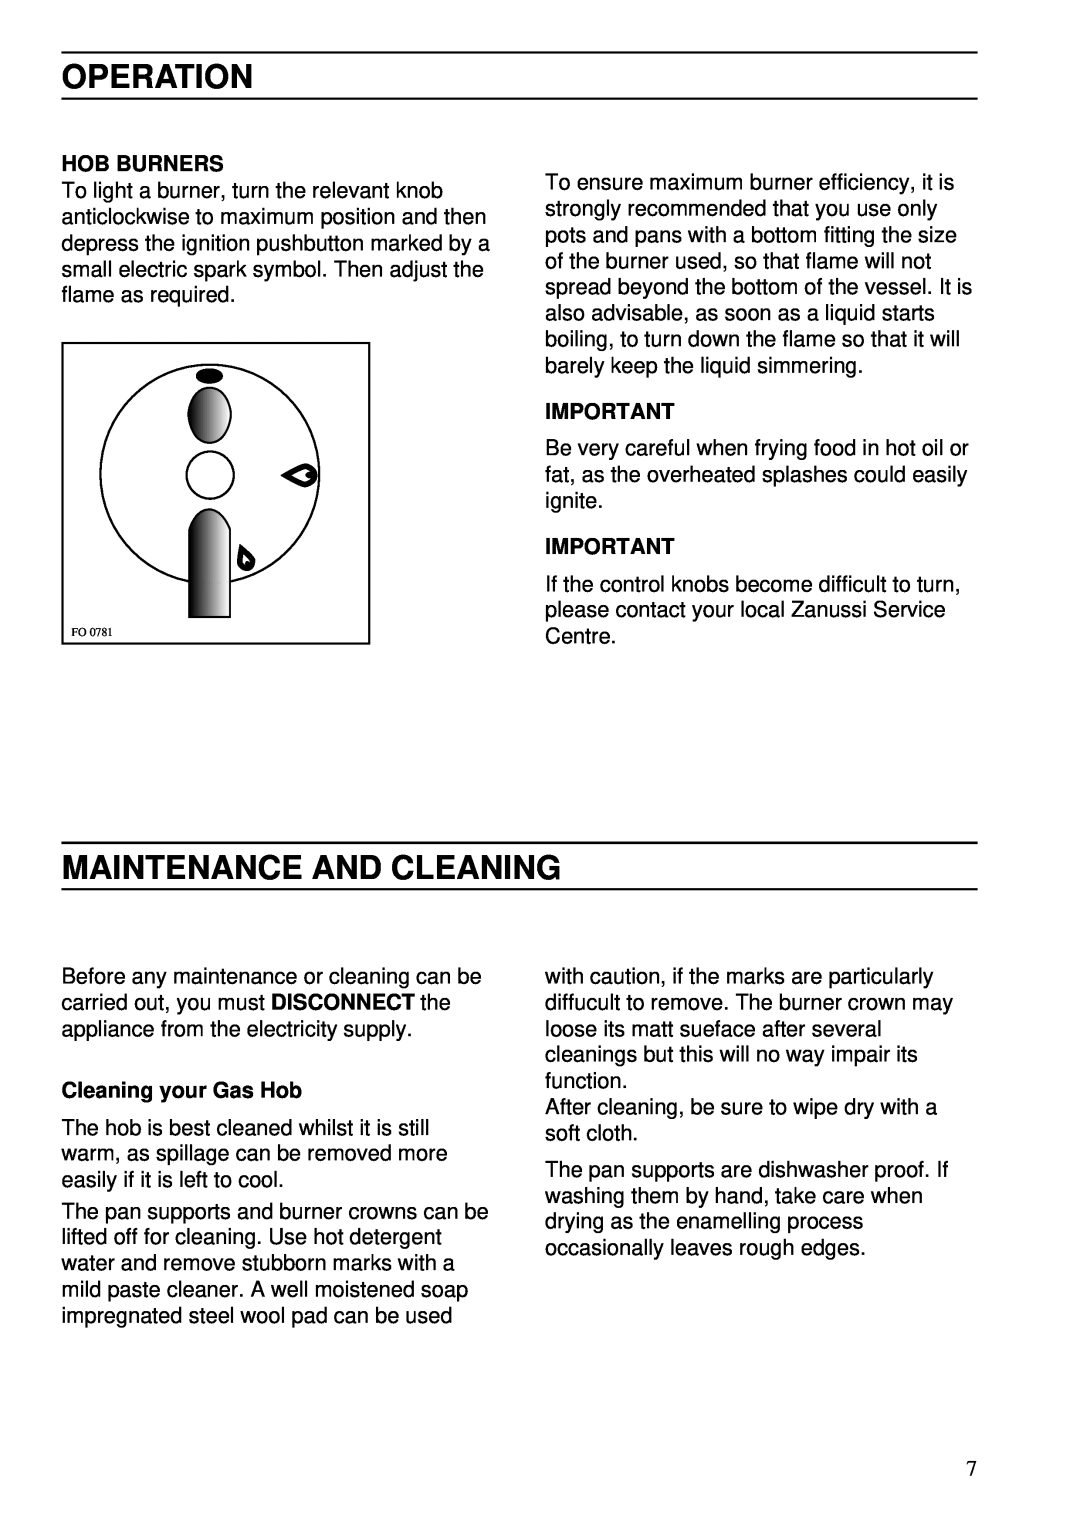 Zanussi ZBG 509 SS manual Operation, Maintenance And Cleaning, Hob Burners, Cleaning your Gas Hob 